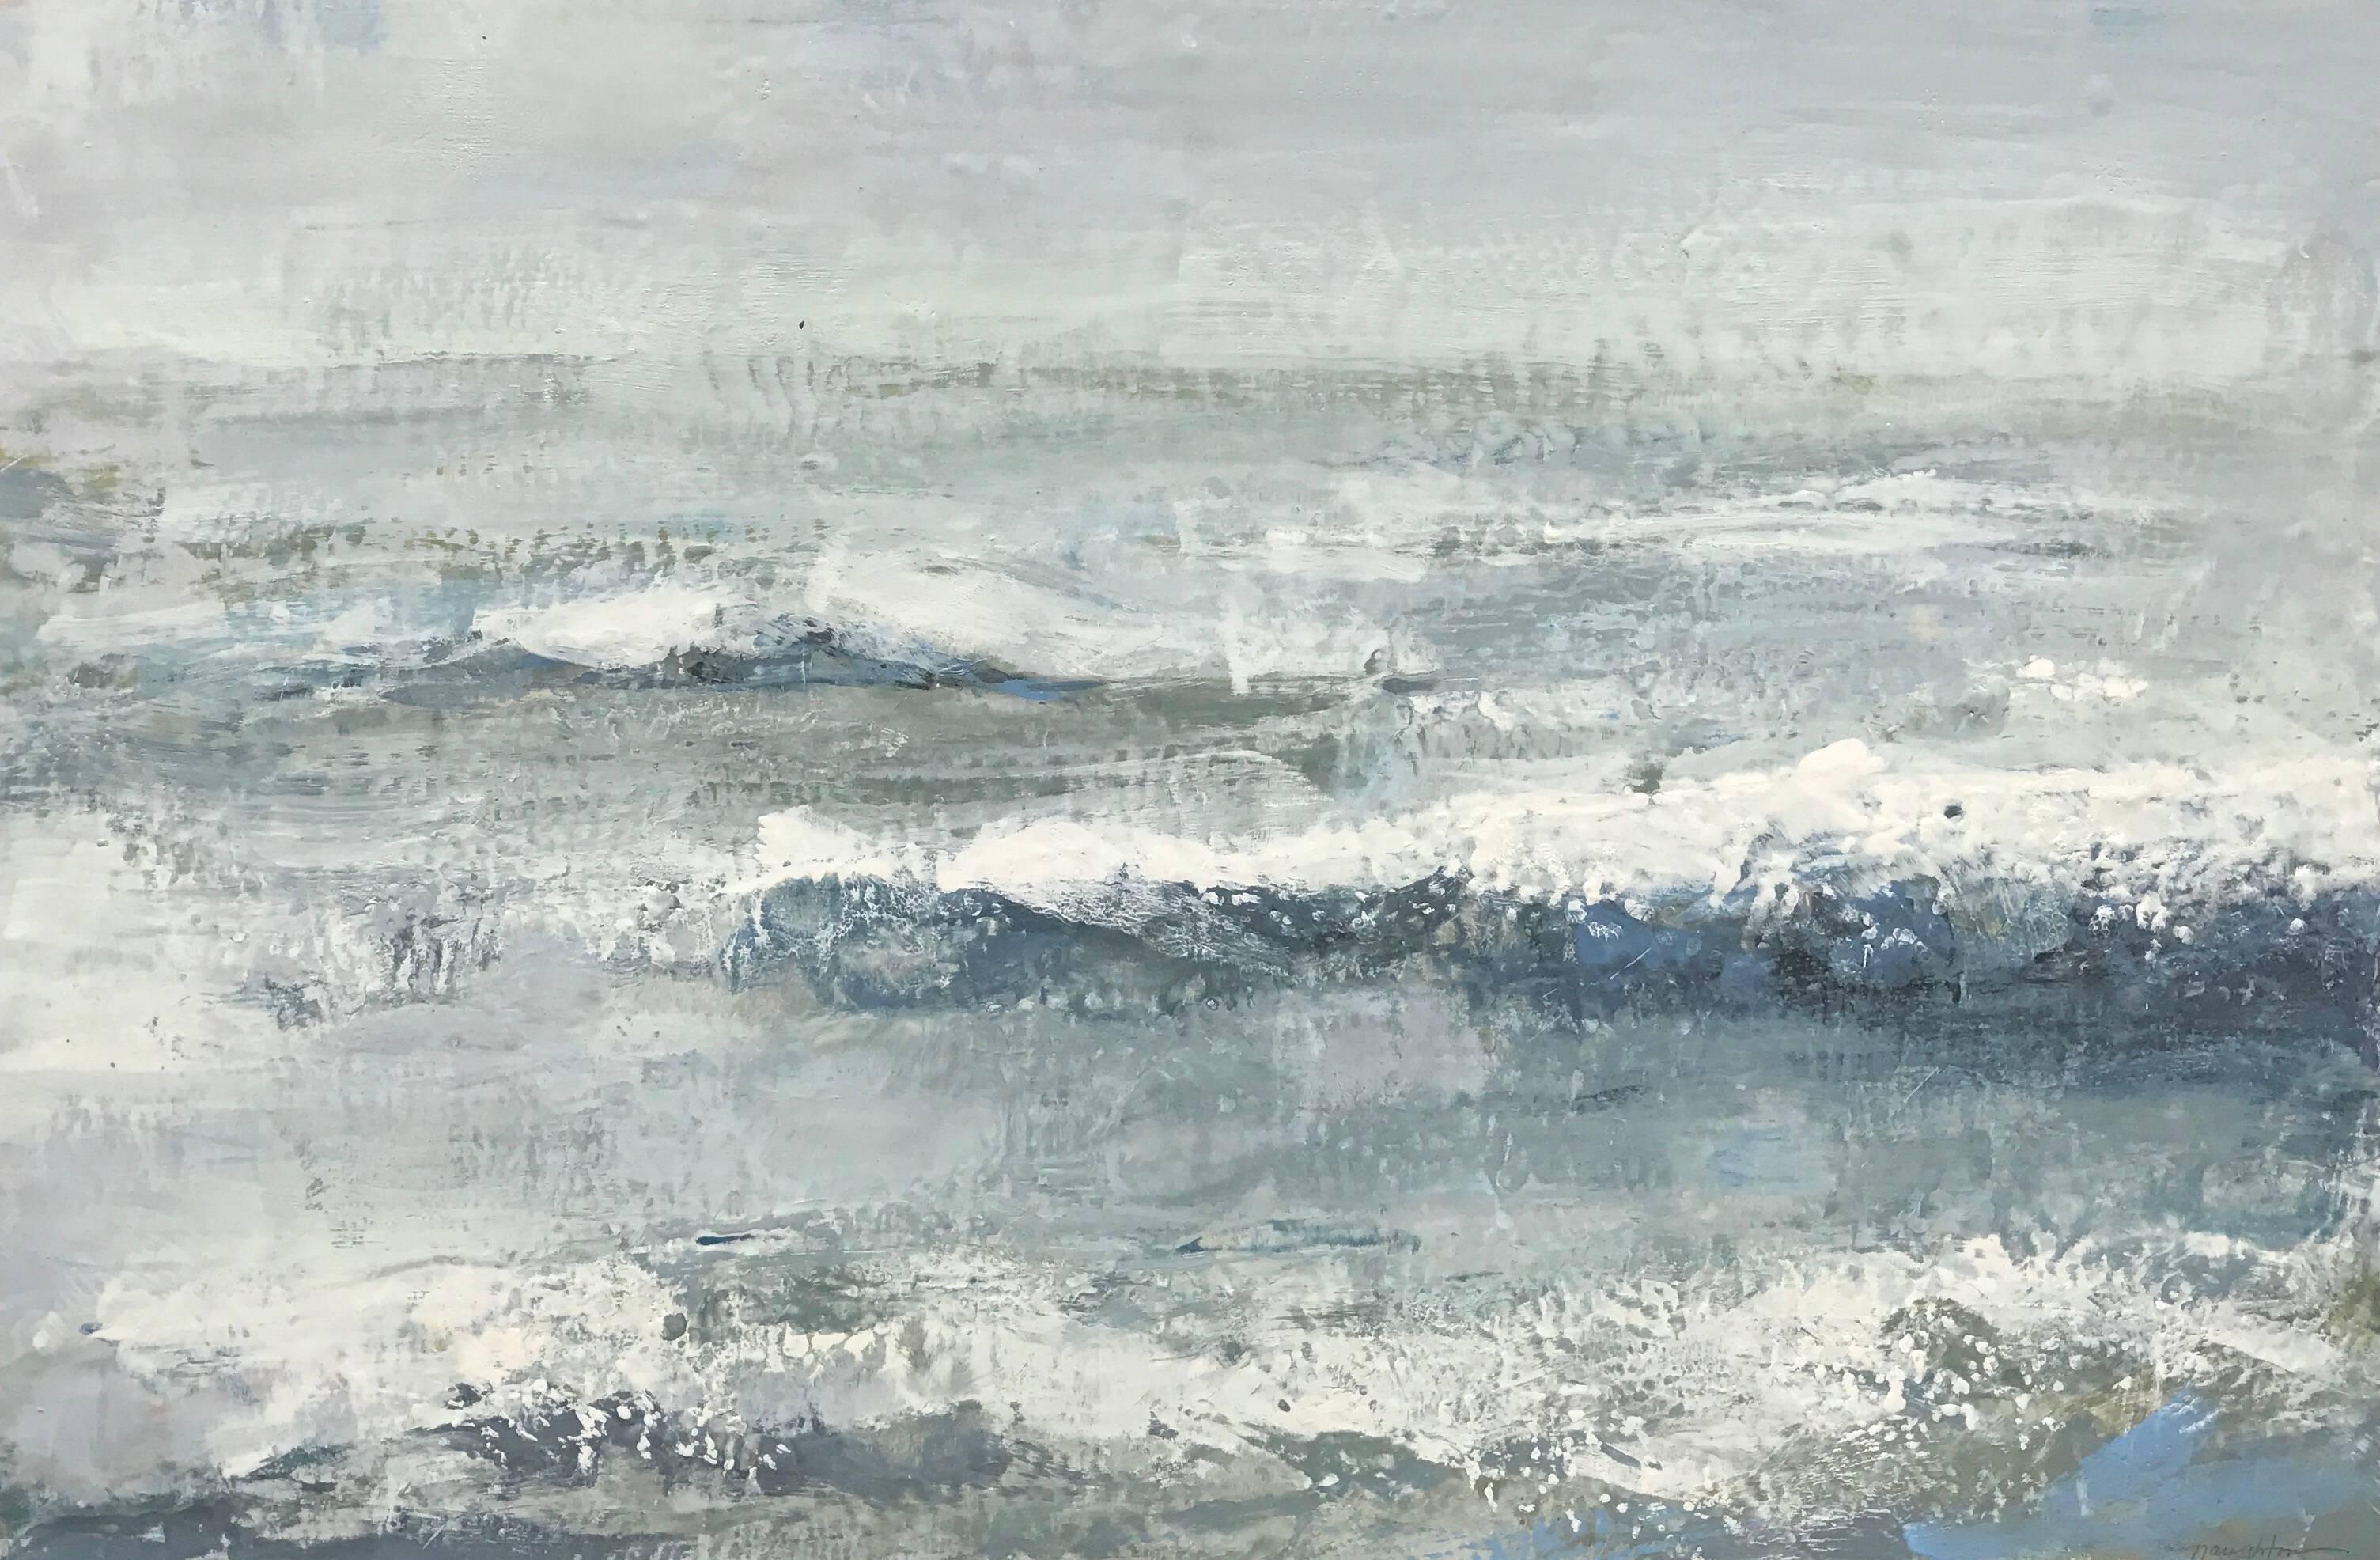 This gorgeous beach scene by American artist, Maureen Naughton, was composed with the encaustic medium.  A wax based material that adds tremendous texture and beautiful depth to the artwork.  This beach scene incorporates the beautiful colors of the